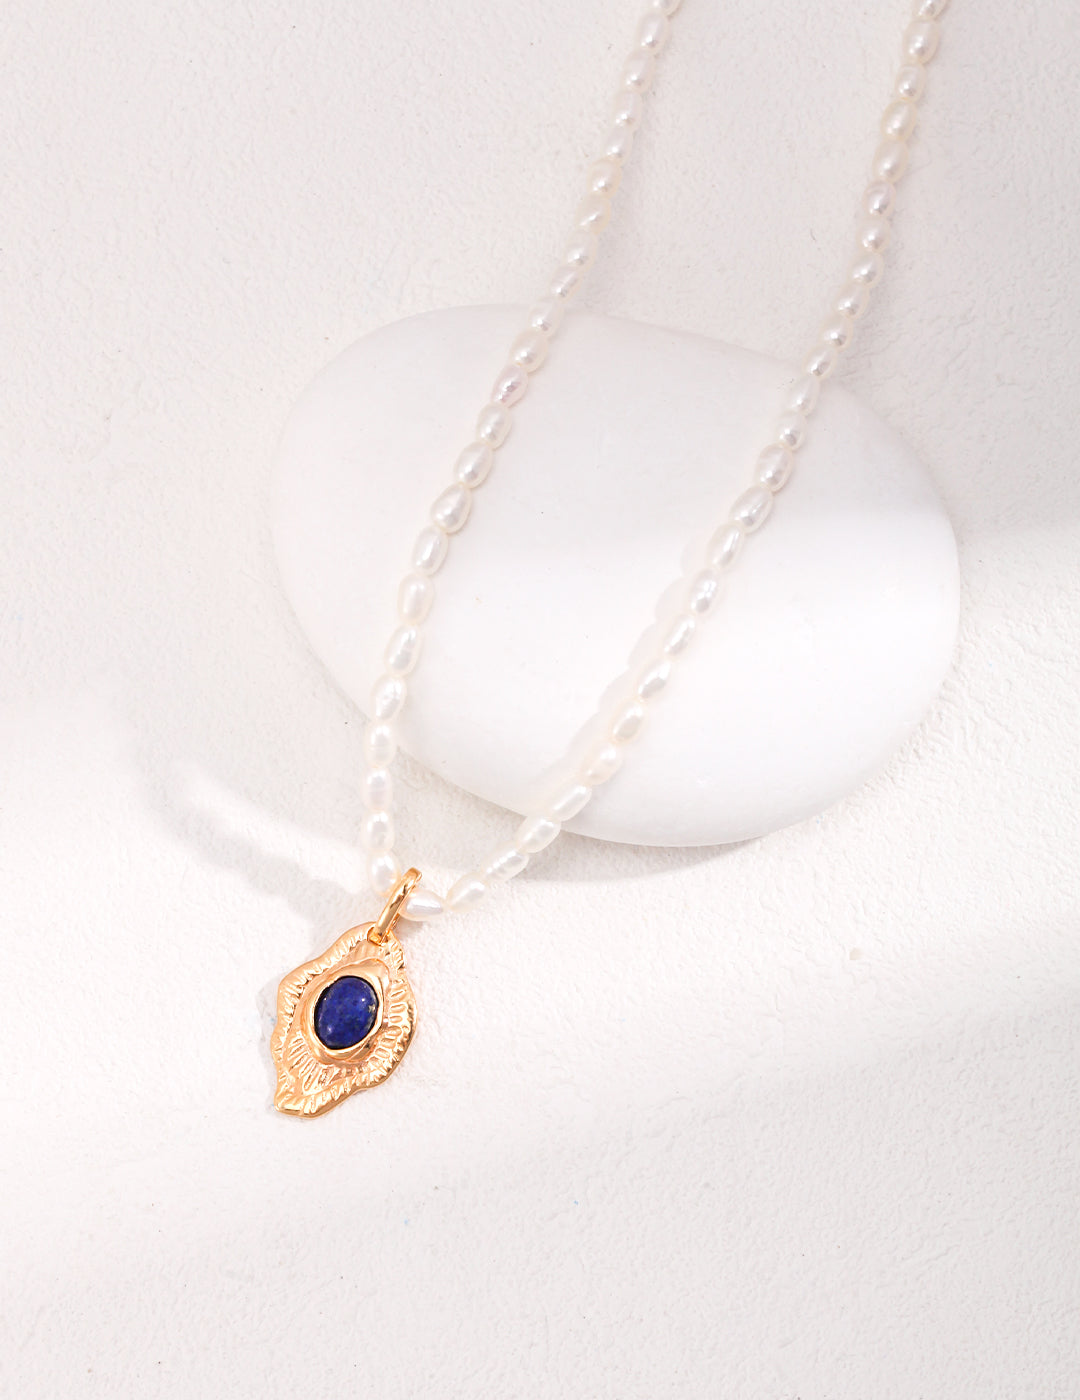 Hand-carved Lapis Lazuli Necklace